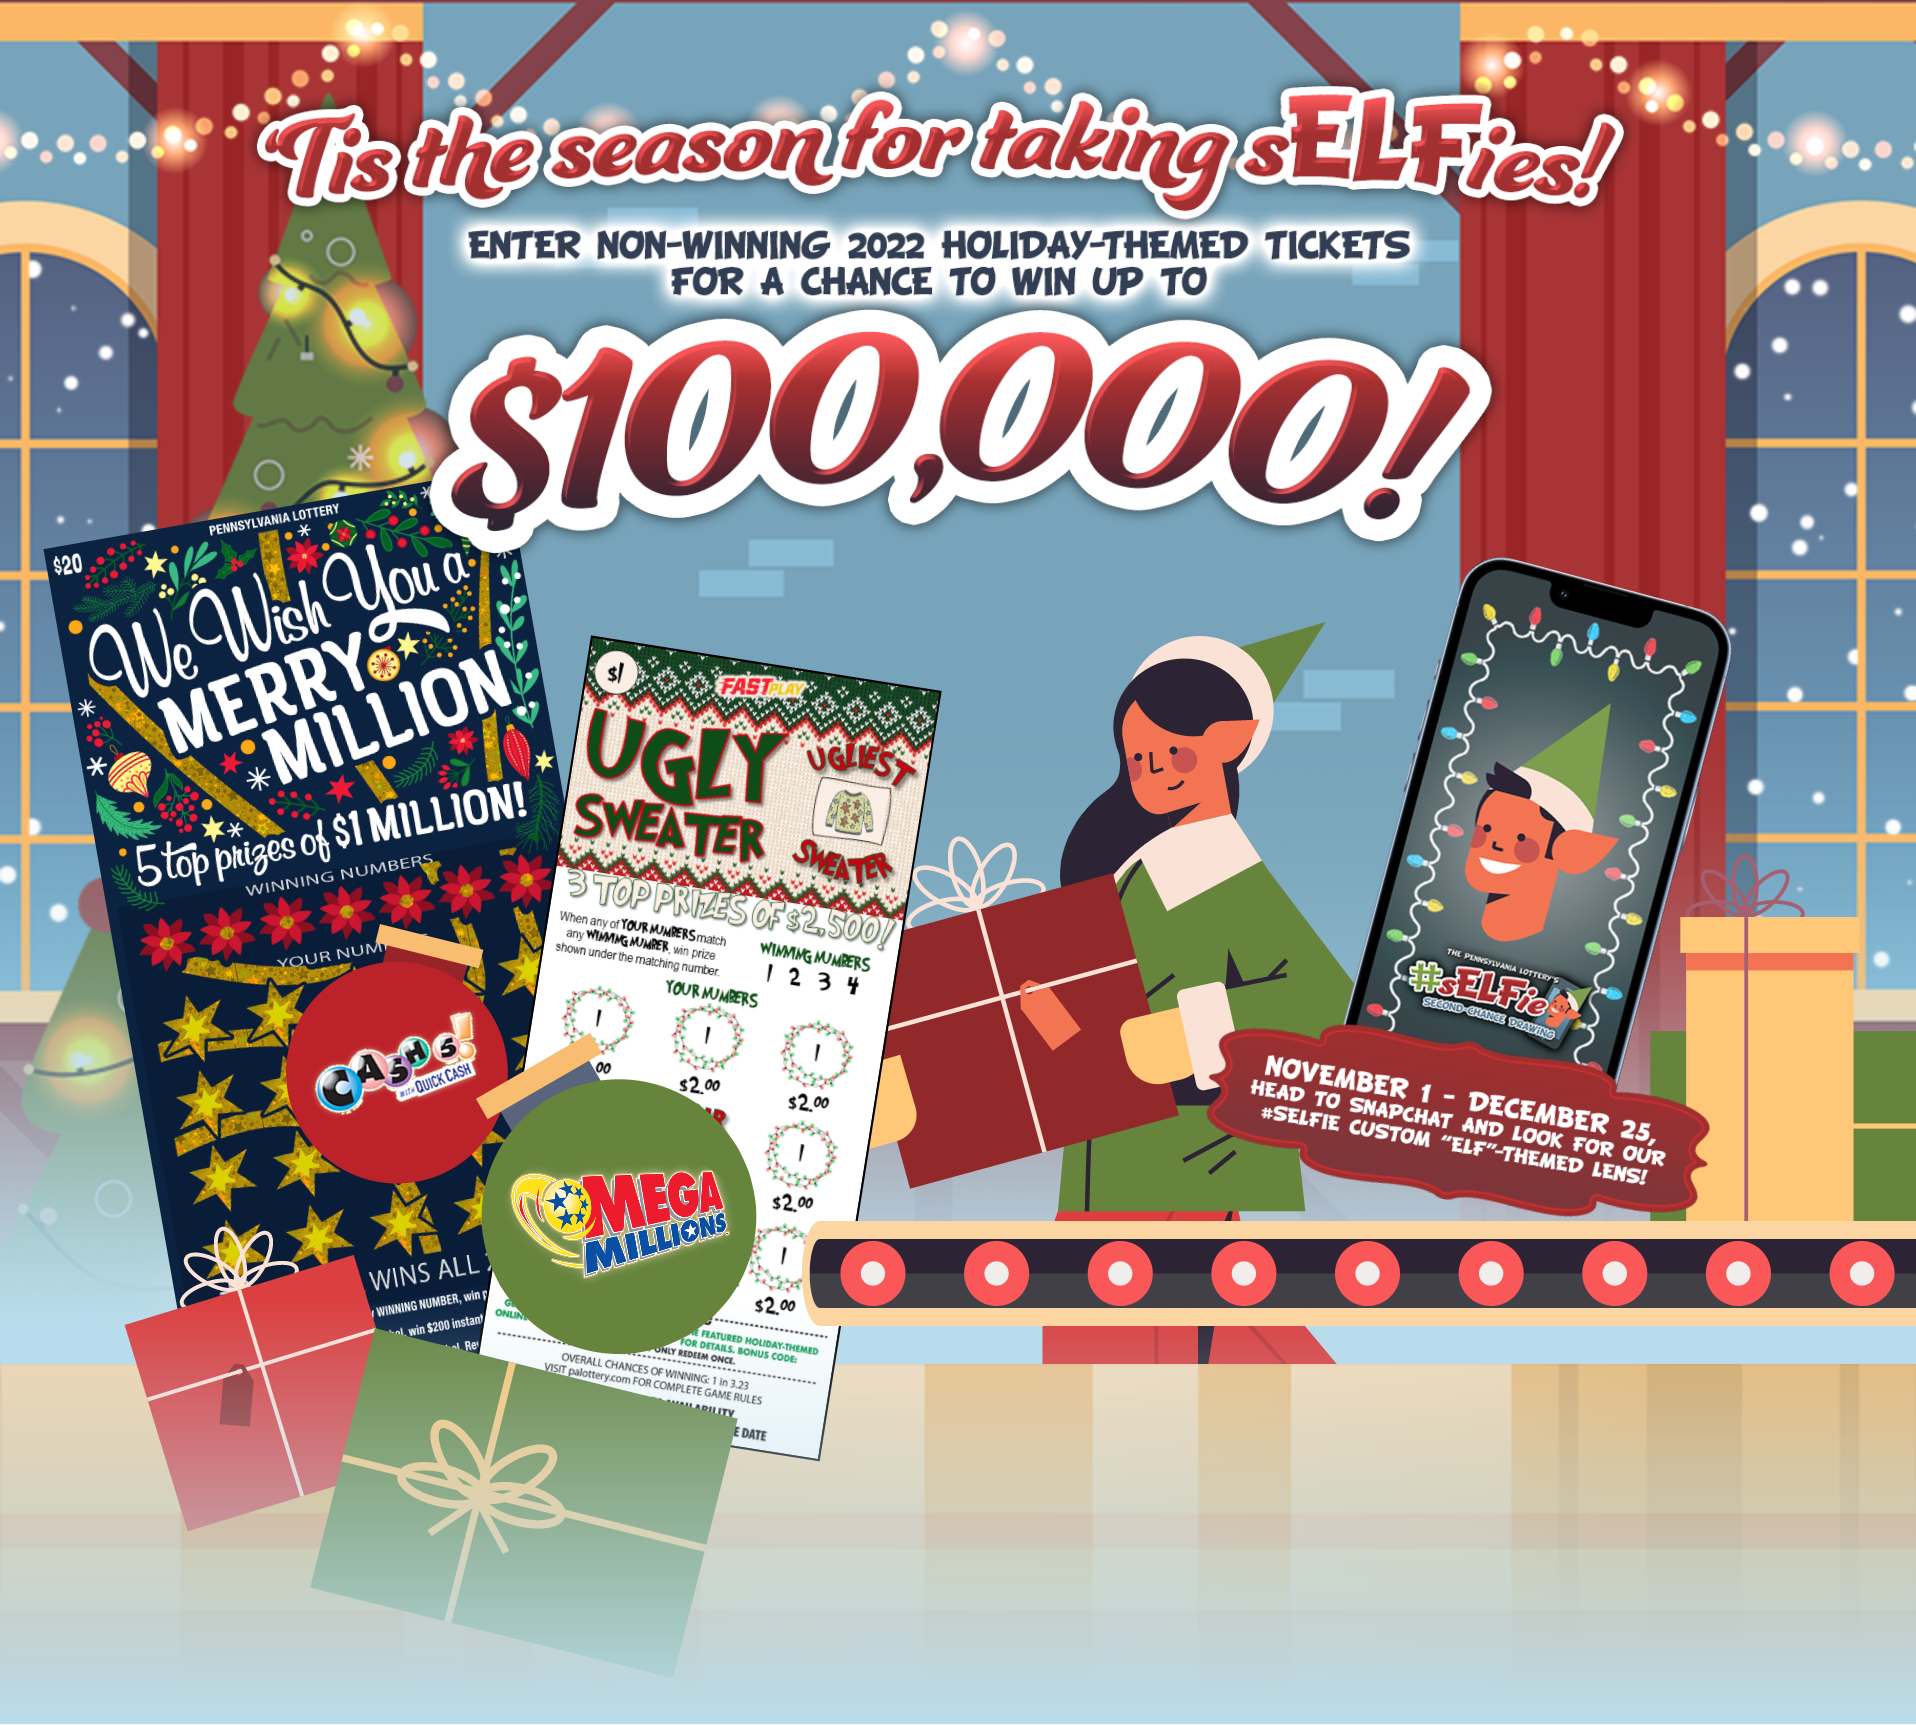 Tis the season for taking Selfies! Enter non-winning 2022 holiday-themed tickets for a chance to win up to $100,000!